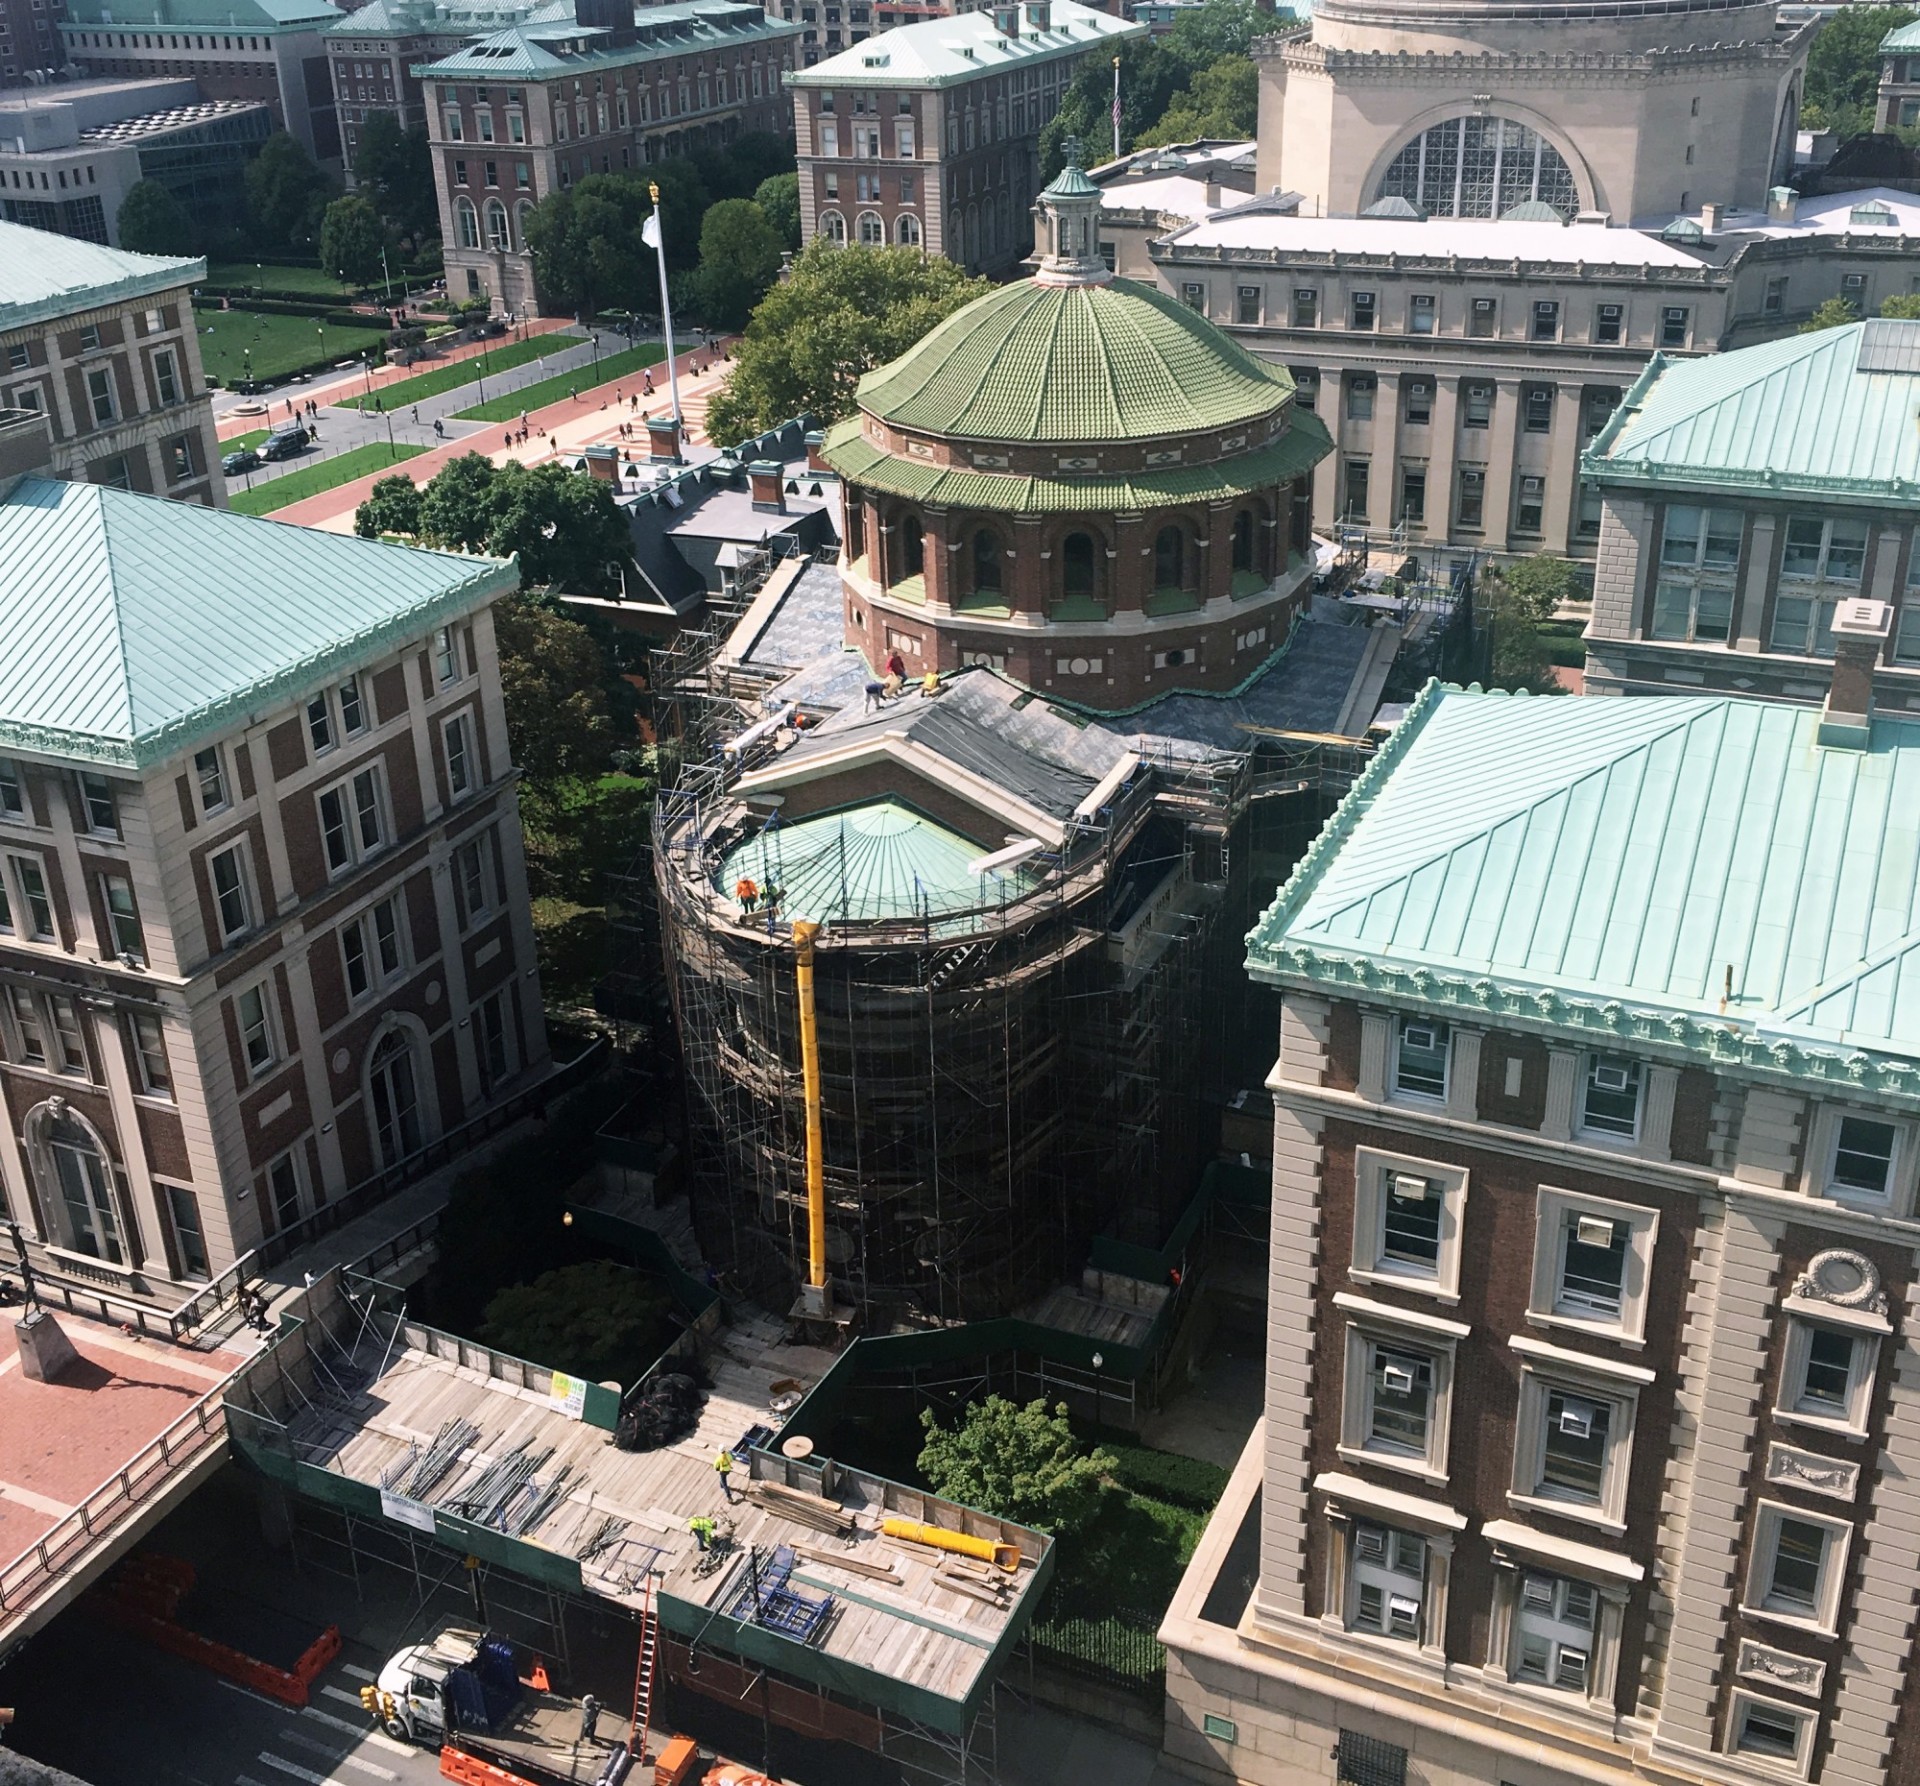 A view from above of the St. Paul’s Chapel replaced roof, showing that the dome’s scaffolding has been removed.